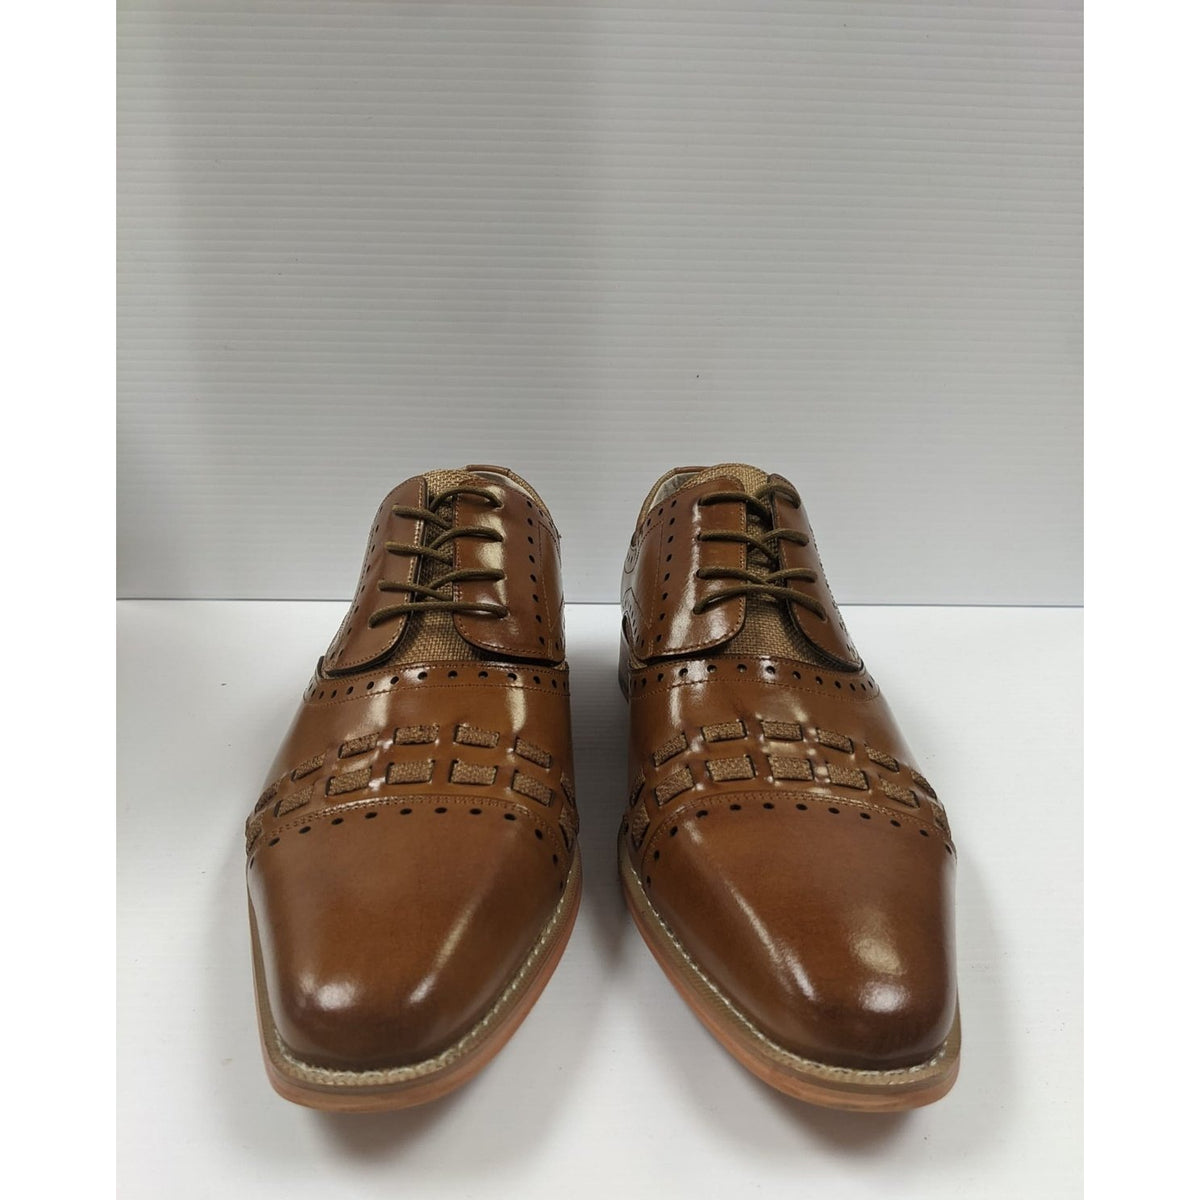 Giovanni SHOES Giovanni Mens Tan 2 Tone Lace-up Oxford Leather Dress Shoes